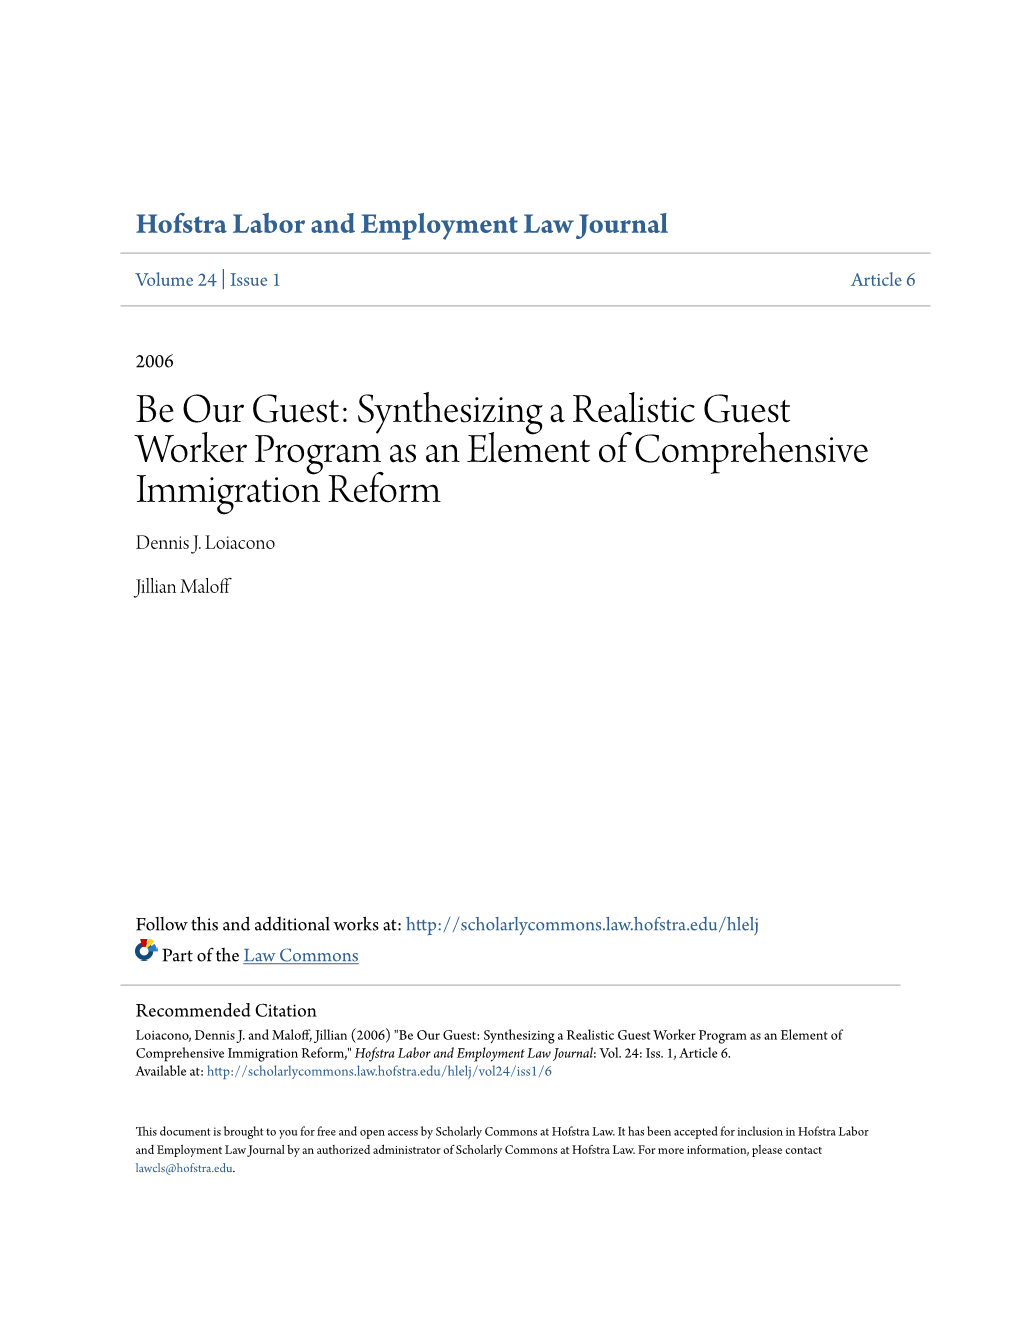 Synthesizing a Realistic Guest Worker Program As an Element of Comprehensive Immigration Reform Dennis J